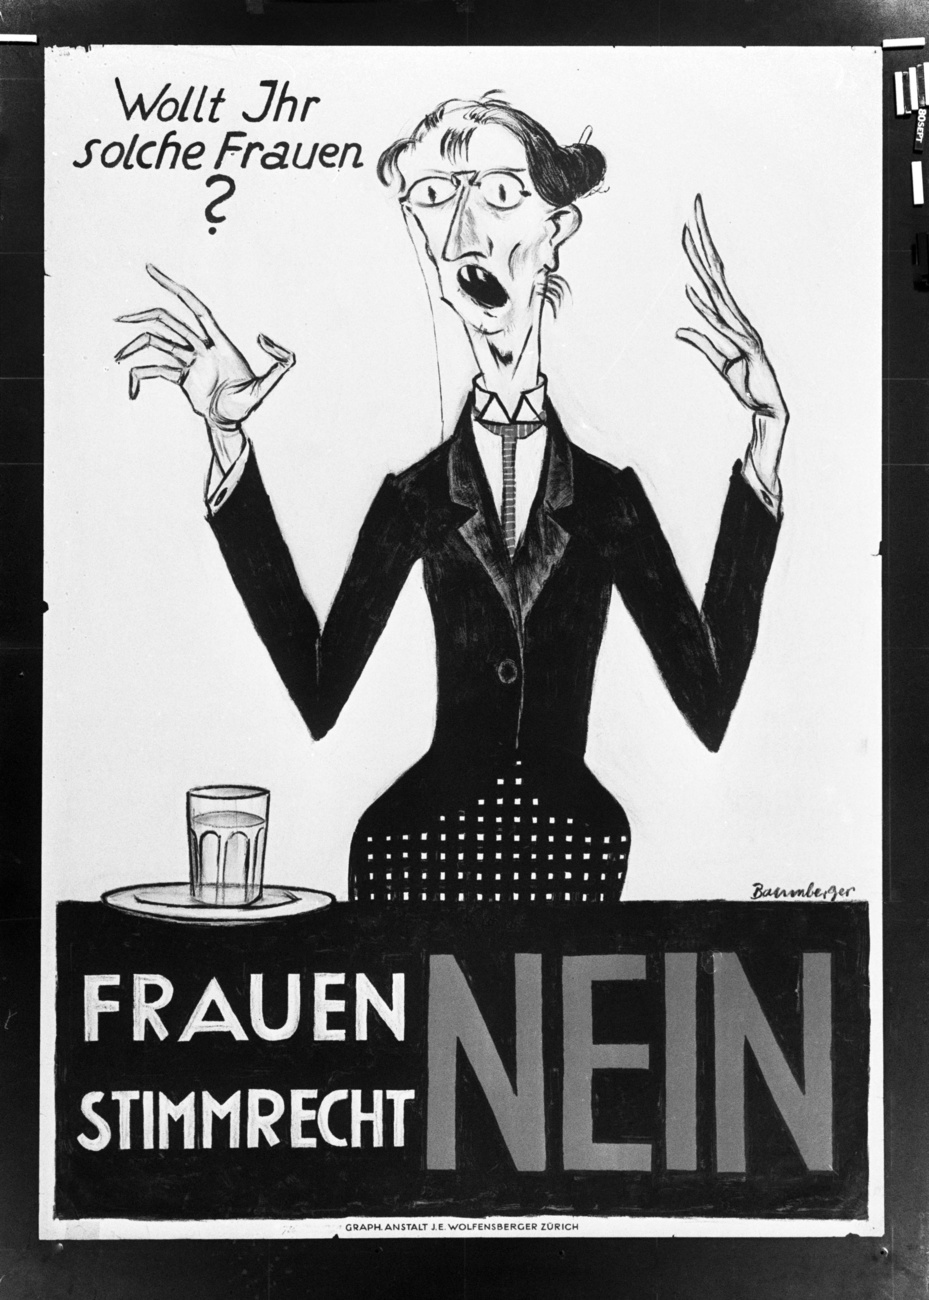 The poster was used in German-speaking Switzerland in the 1920 referendum campaign in the cantons of Basel-Stadt and Zurich.